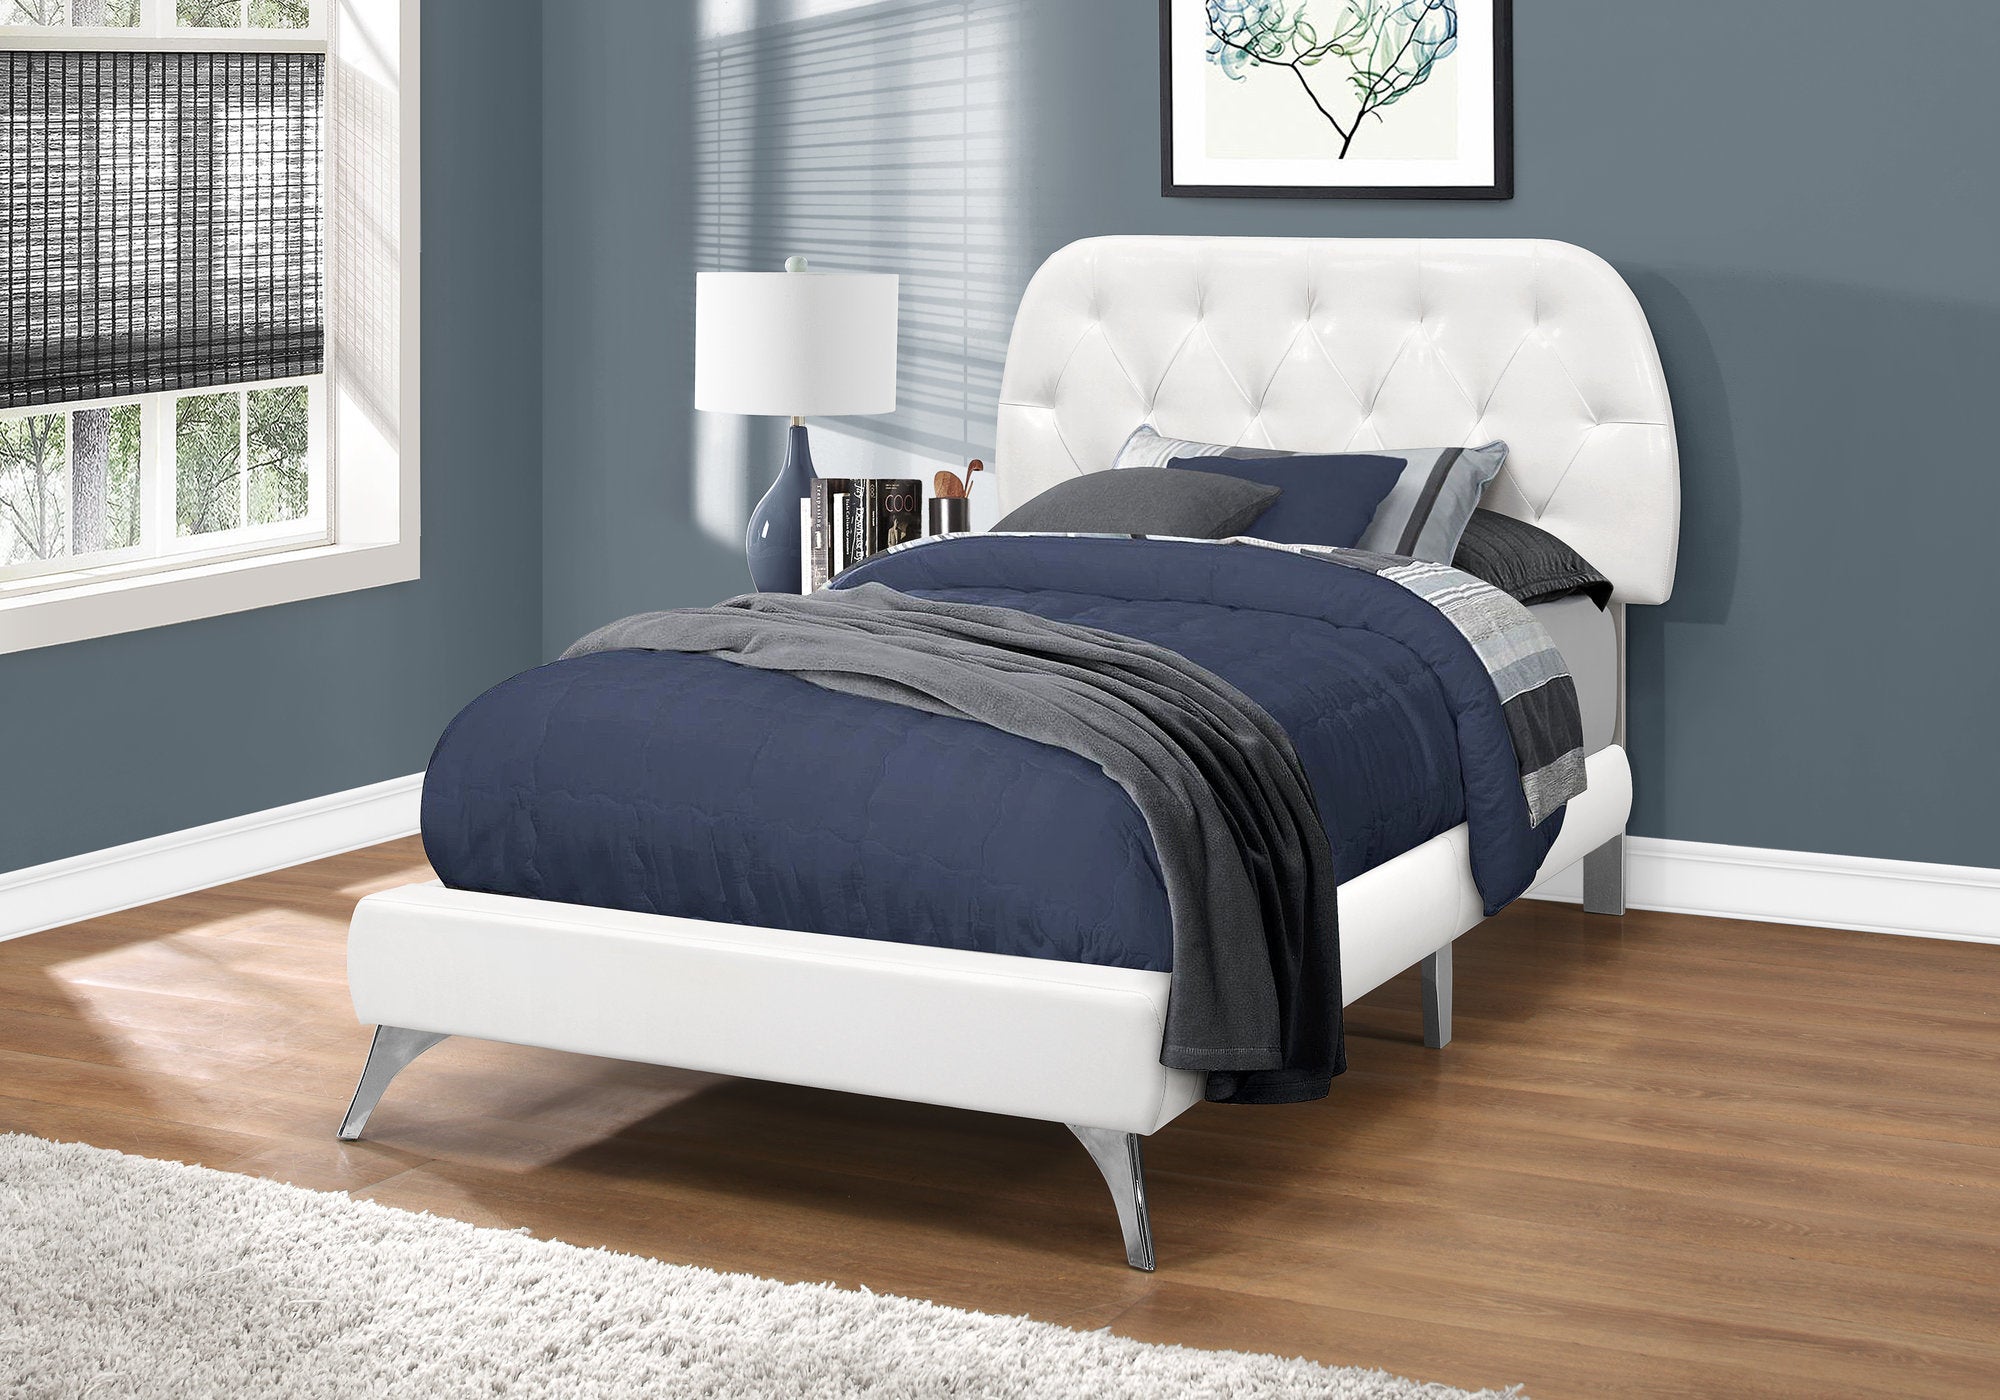 45.25" White Solid Wood MDF Foam and Linen Twin Sized Bed with Chrome Legs Default Title